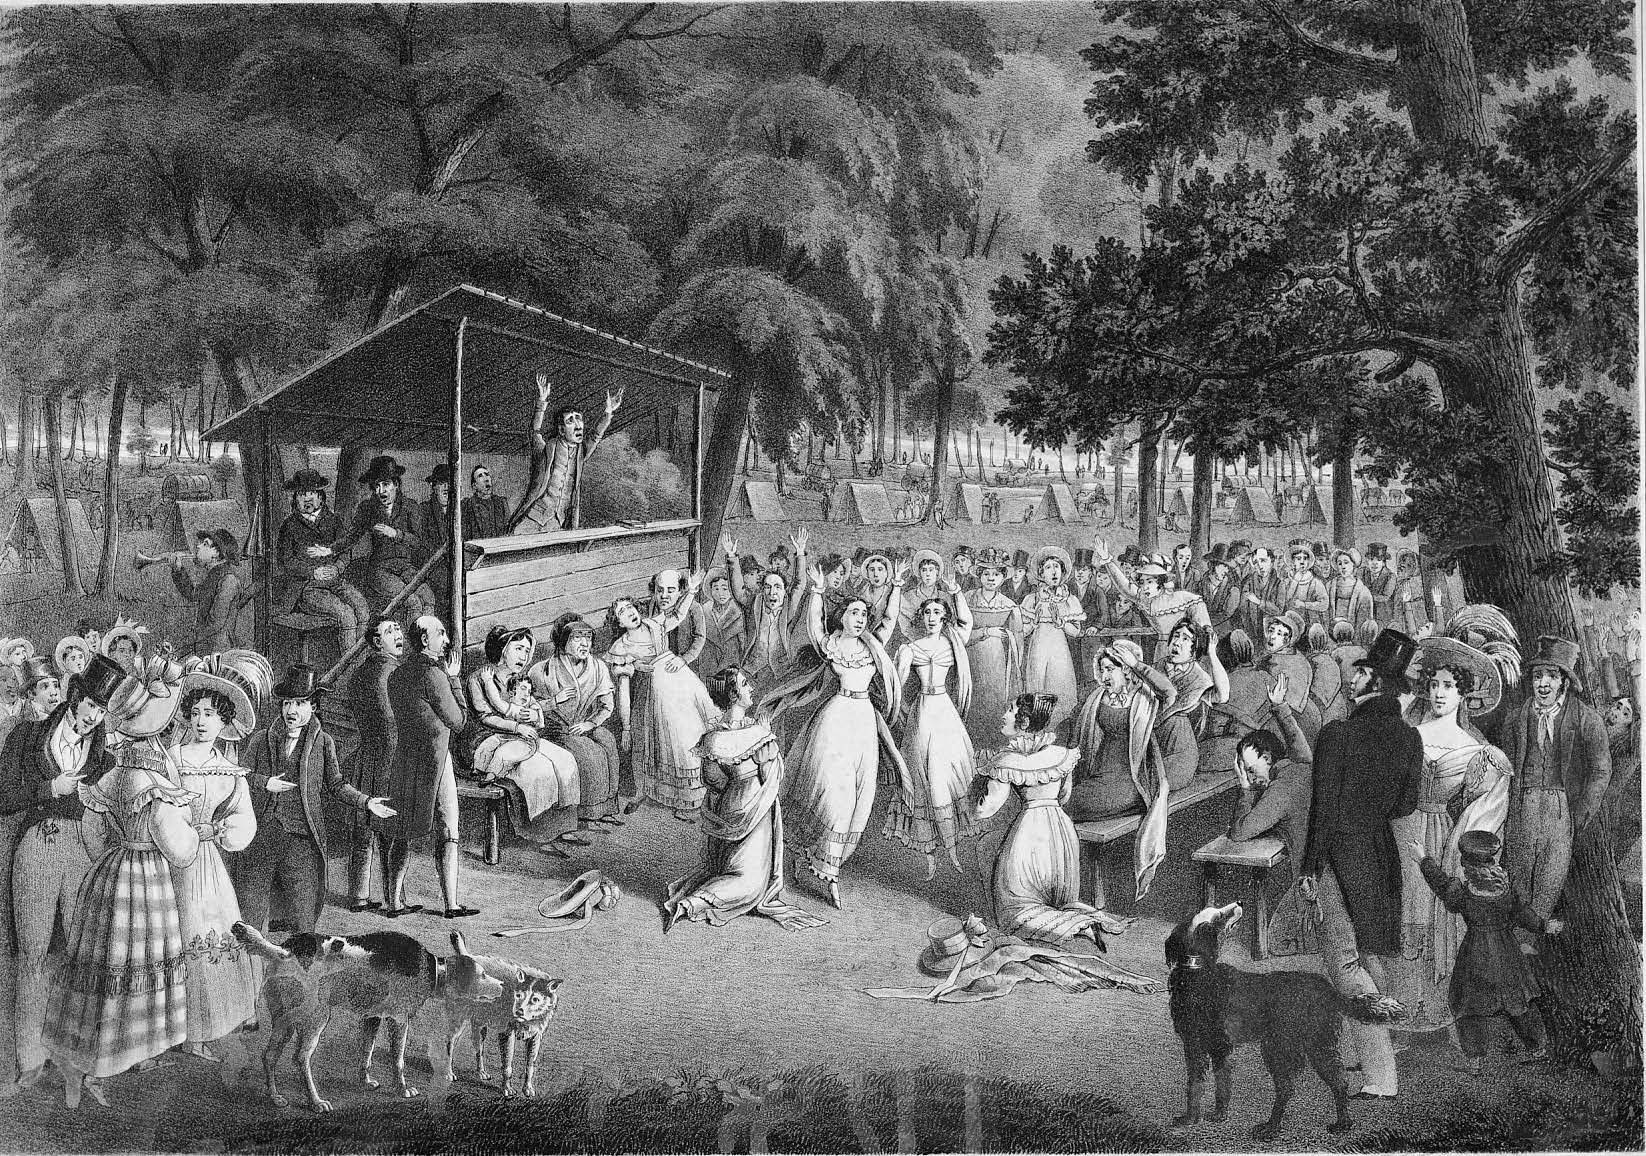 Camp-Meeting, by Harry T. Peters. Courtesy of National Museum of American History, "America on Stone" Lithography Collection.